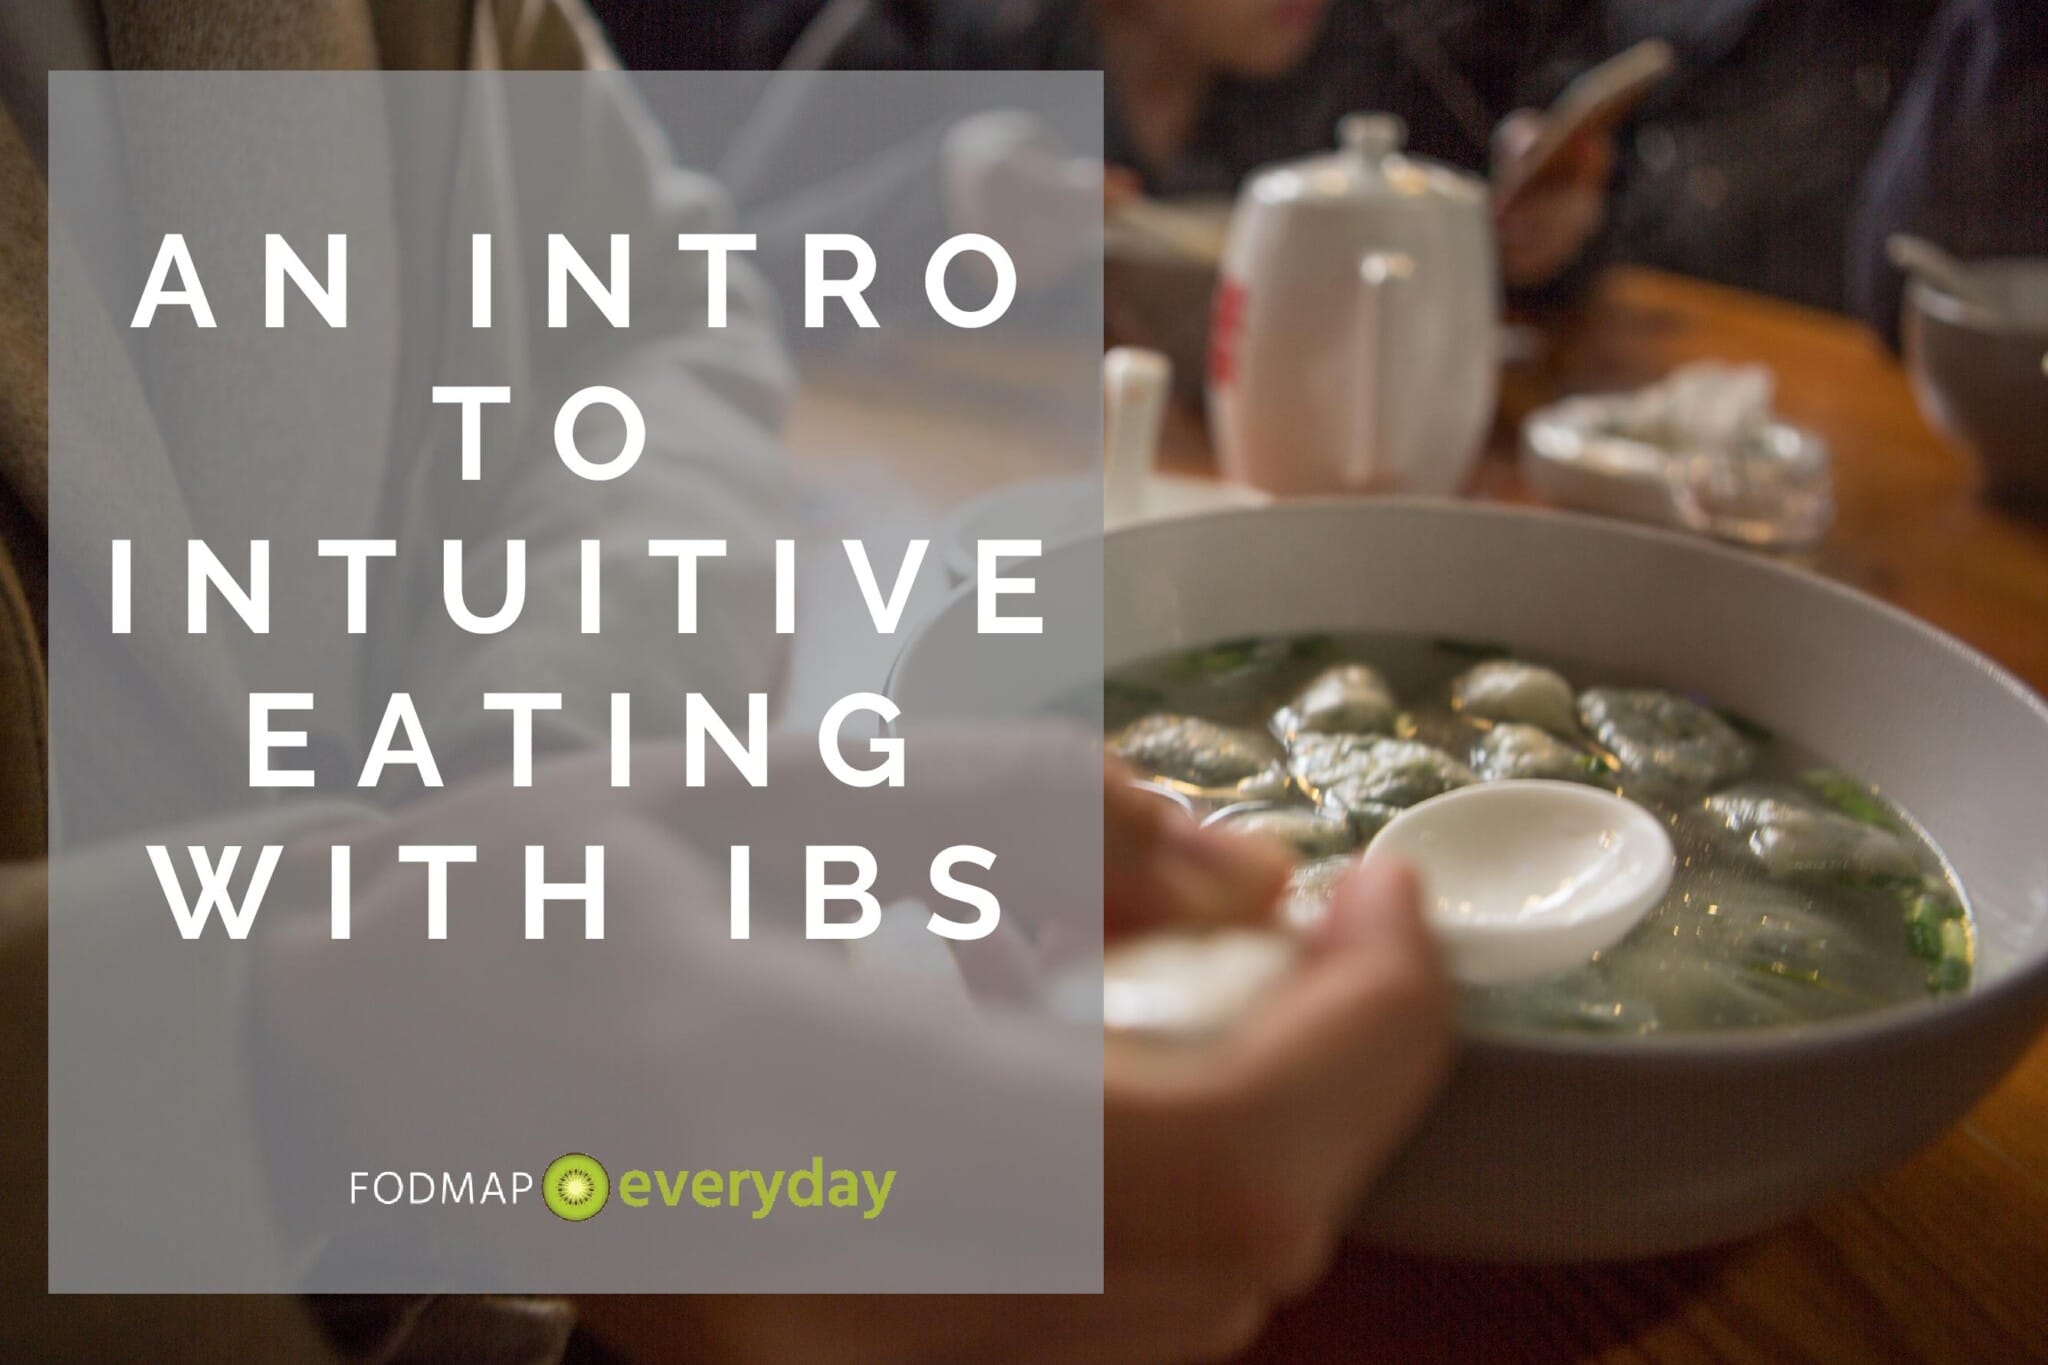 Intuitive Eating Lab Worksheet Table 1. Intuitive